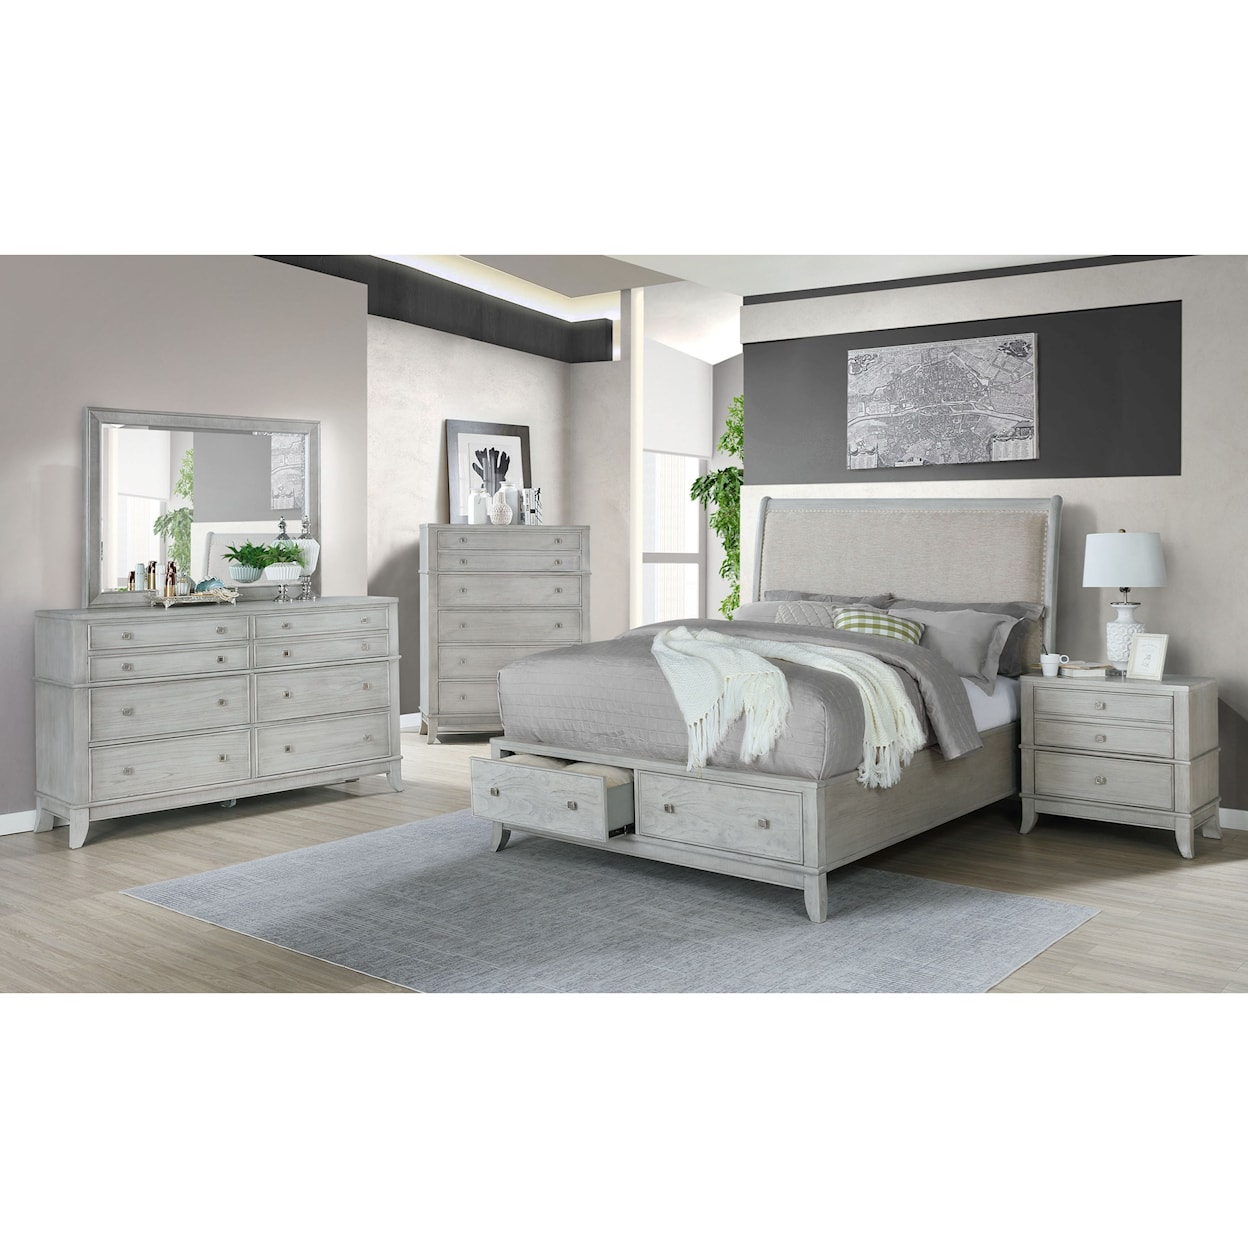 Avalon Furniture B00191 Queen Bedroom Group